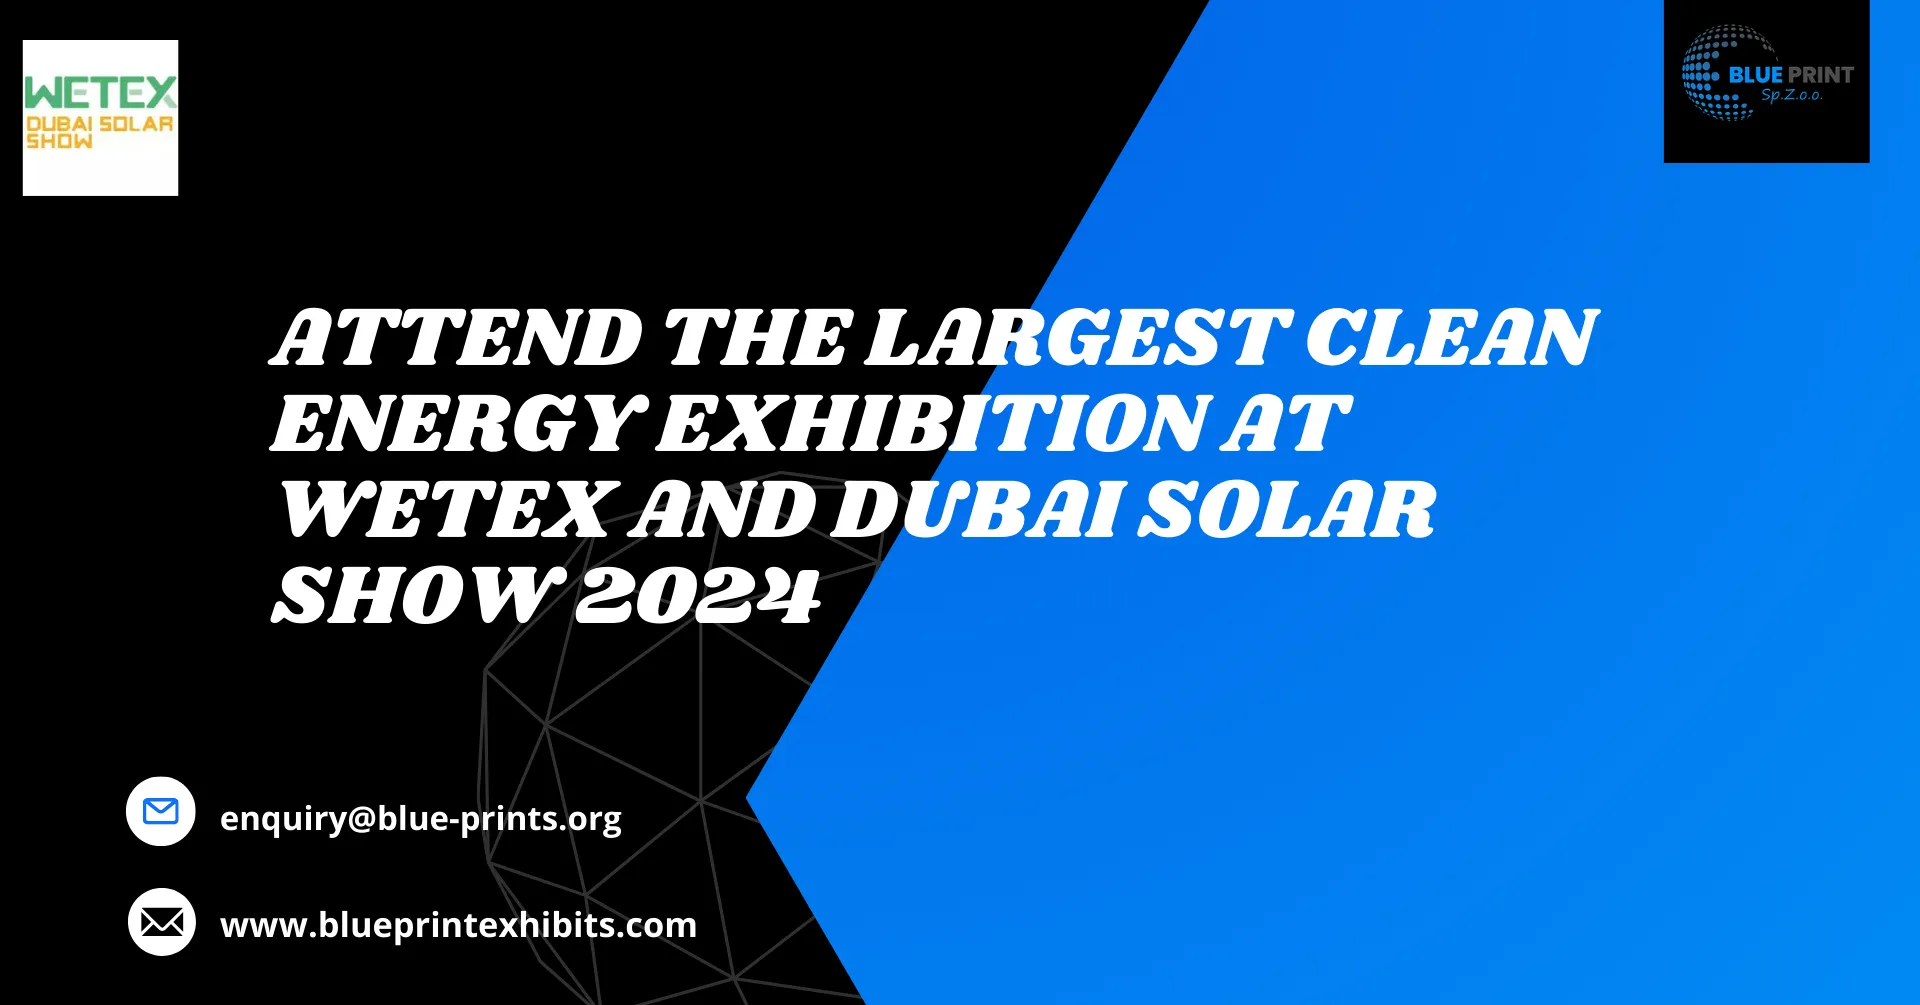 Attend the Largest Clean Energy Exhibition at WETEX and Dubai Solar Show 2024